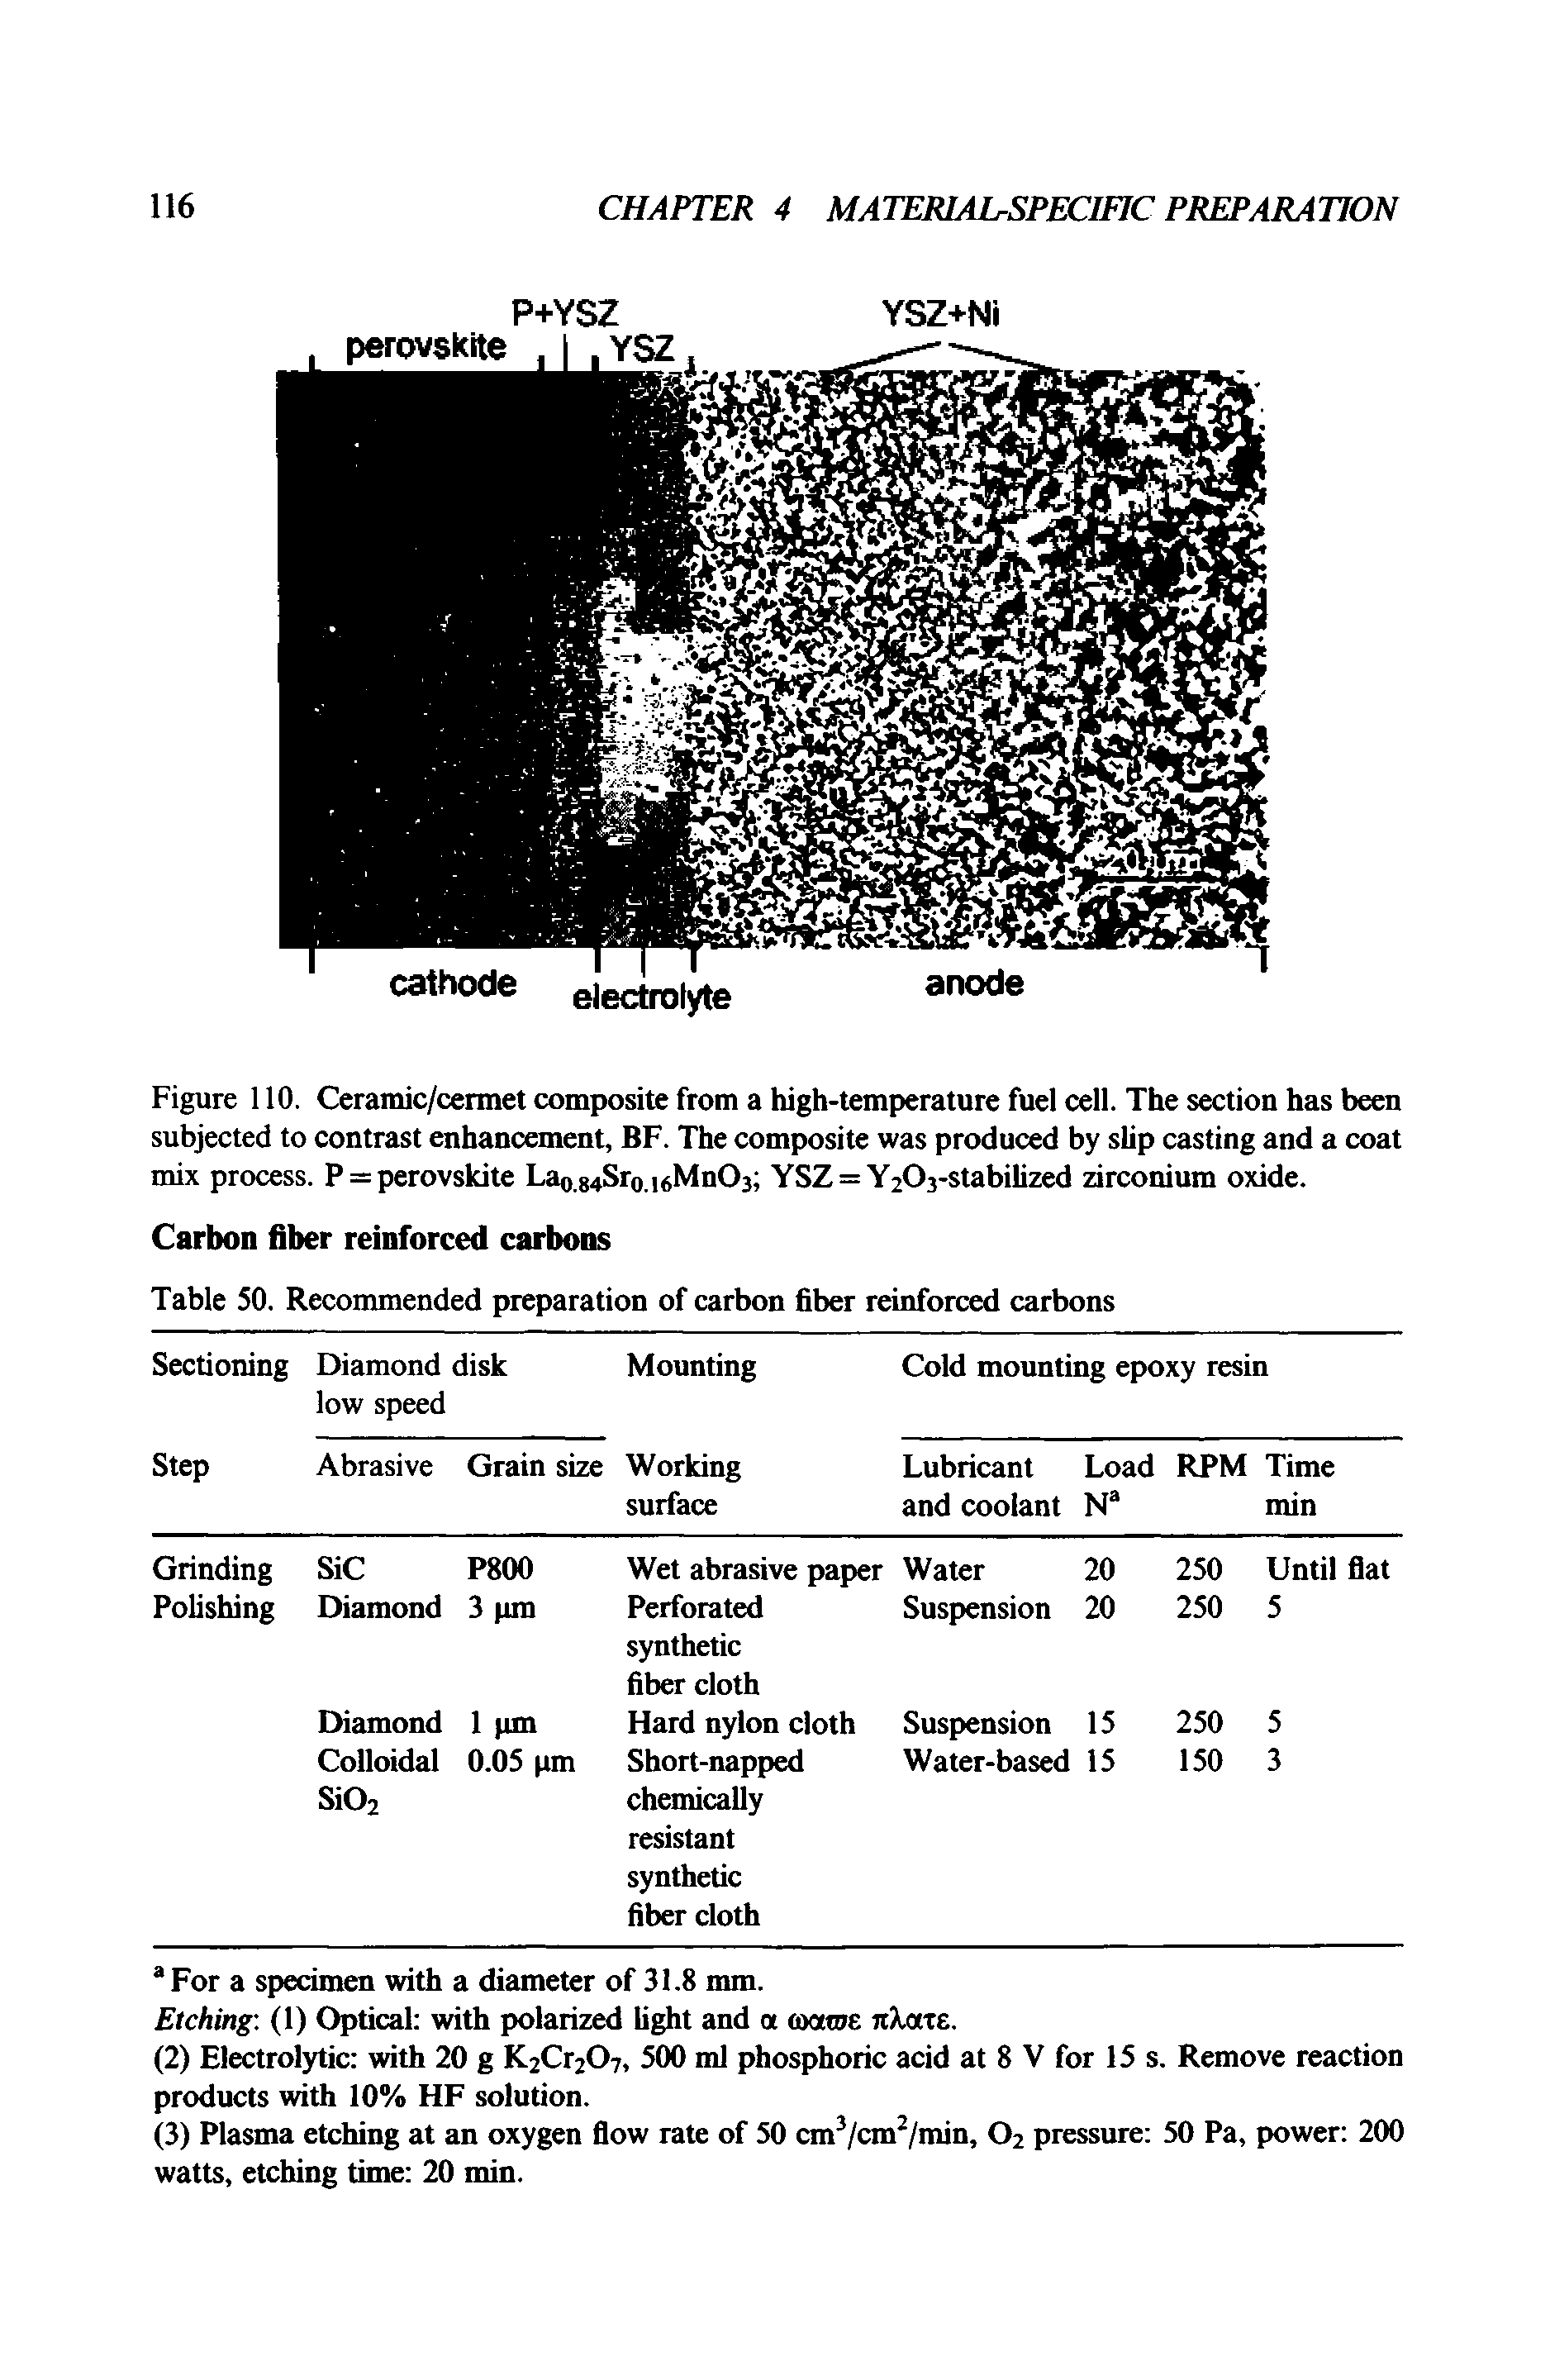 Figure 110. Ceramic/cermet composite from a high-temperature fuel cell. The section has been subjected to contrast enhancement, BF. The composite was produced by slip casting and a coat mix process. P = perovskite Lao,84Sro,i6Mn03 YSZ = Y203-stabilized zirconium oxide.